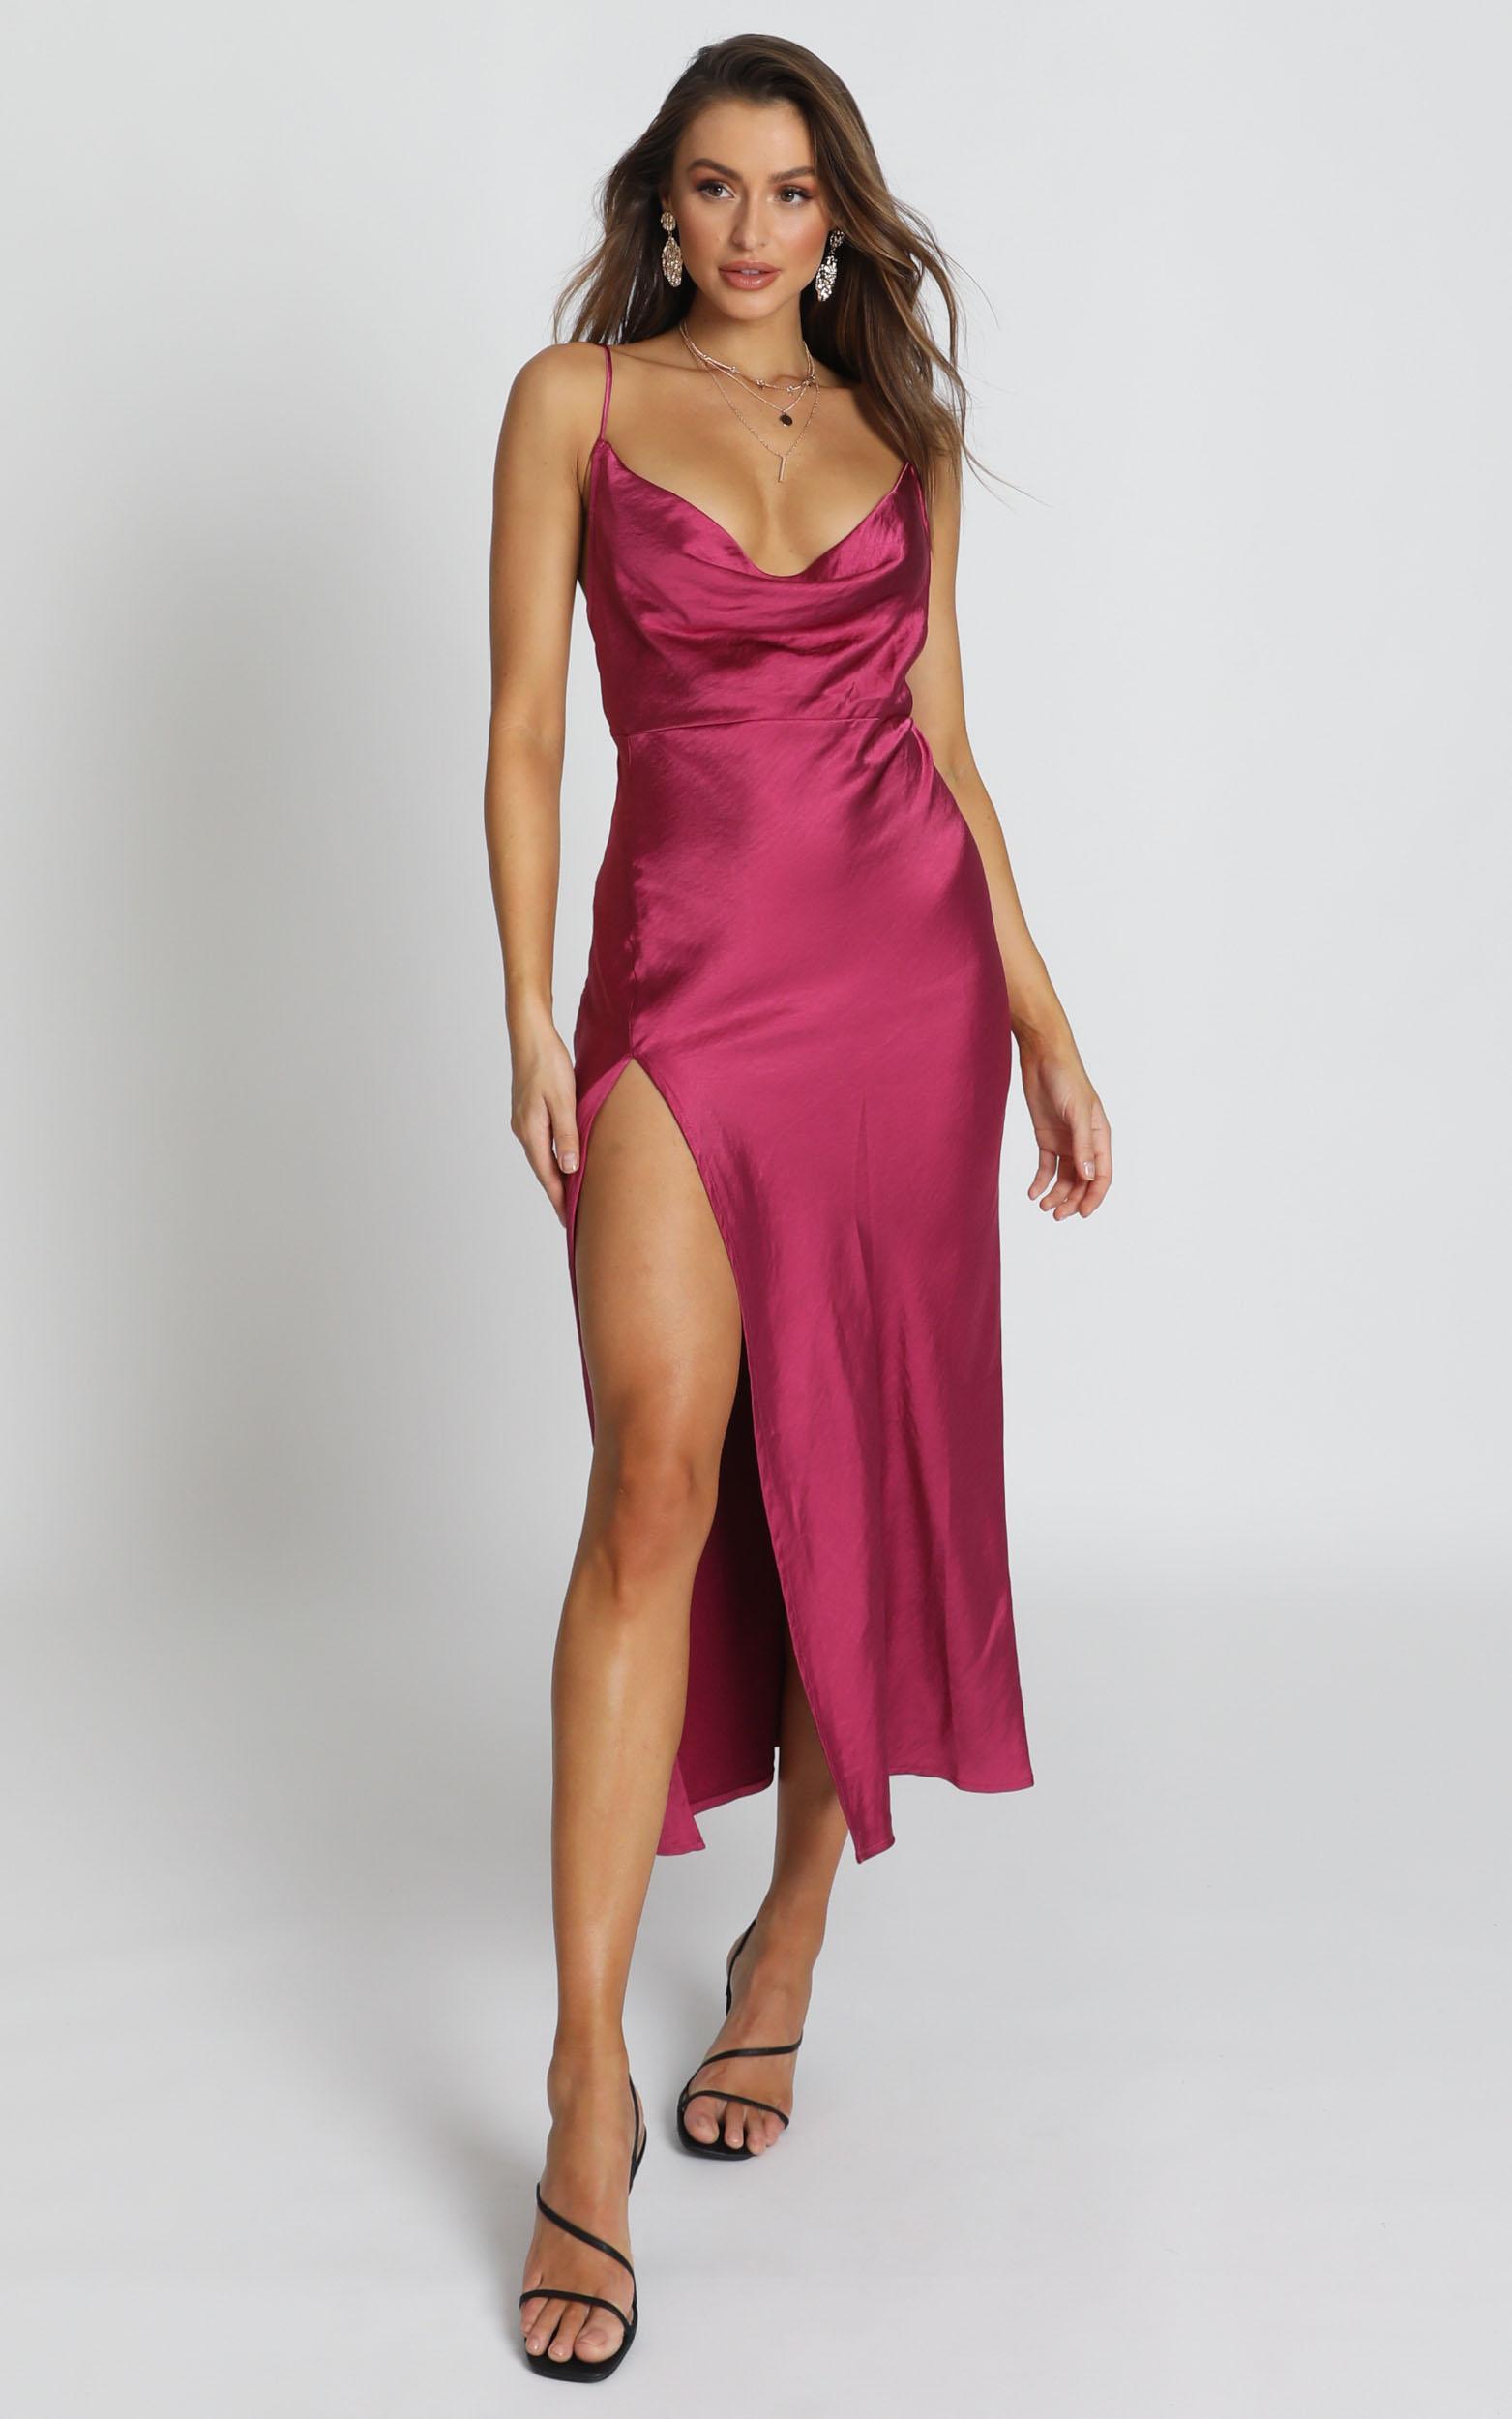 Lioness - Walk The Line Dress In Berry ...